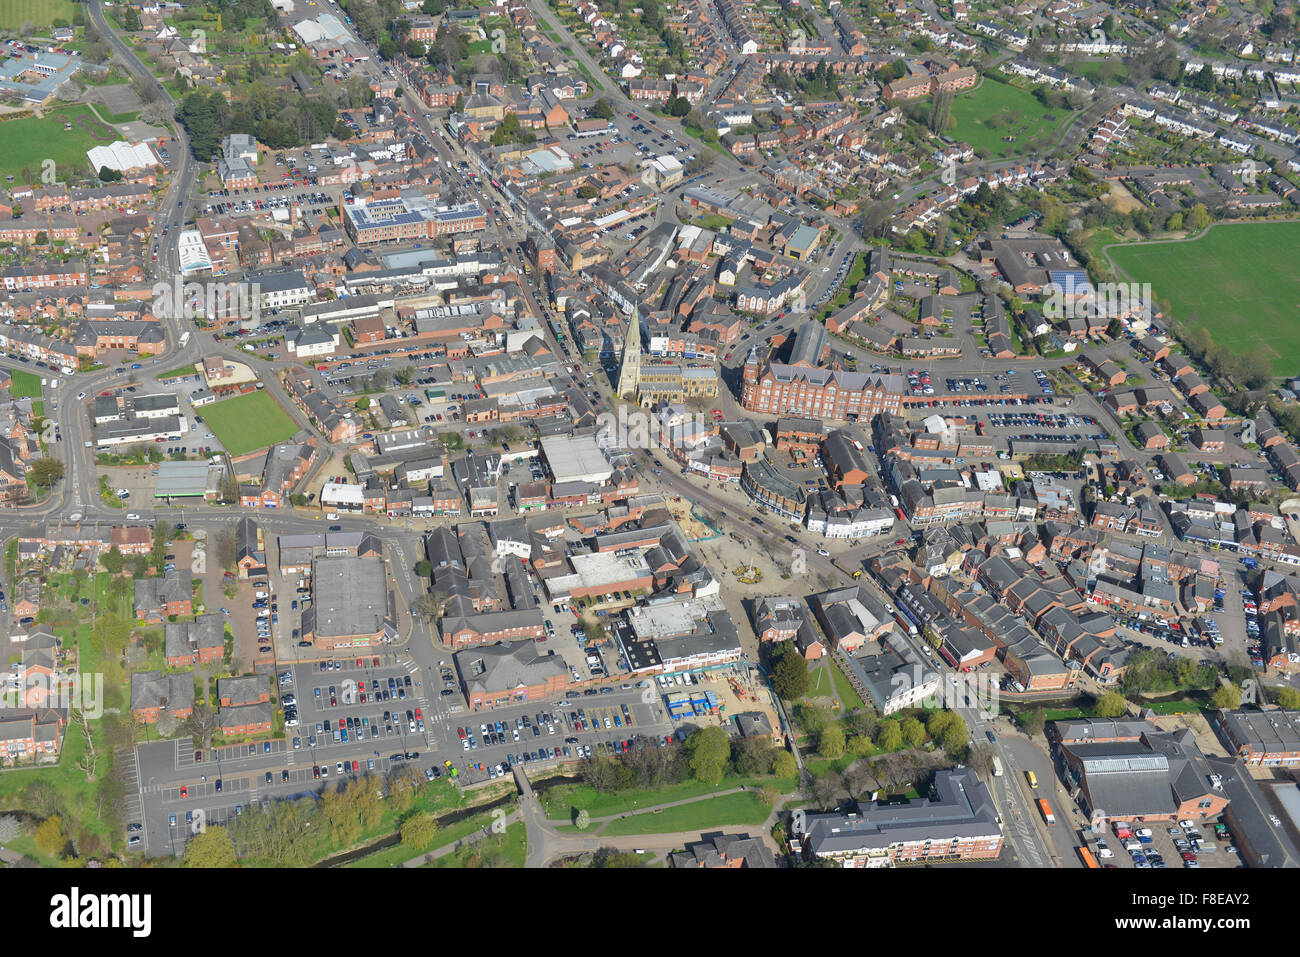 An aerial view of the Leicestershire town of Market Harborough Stock Photo